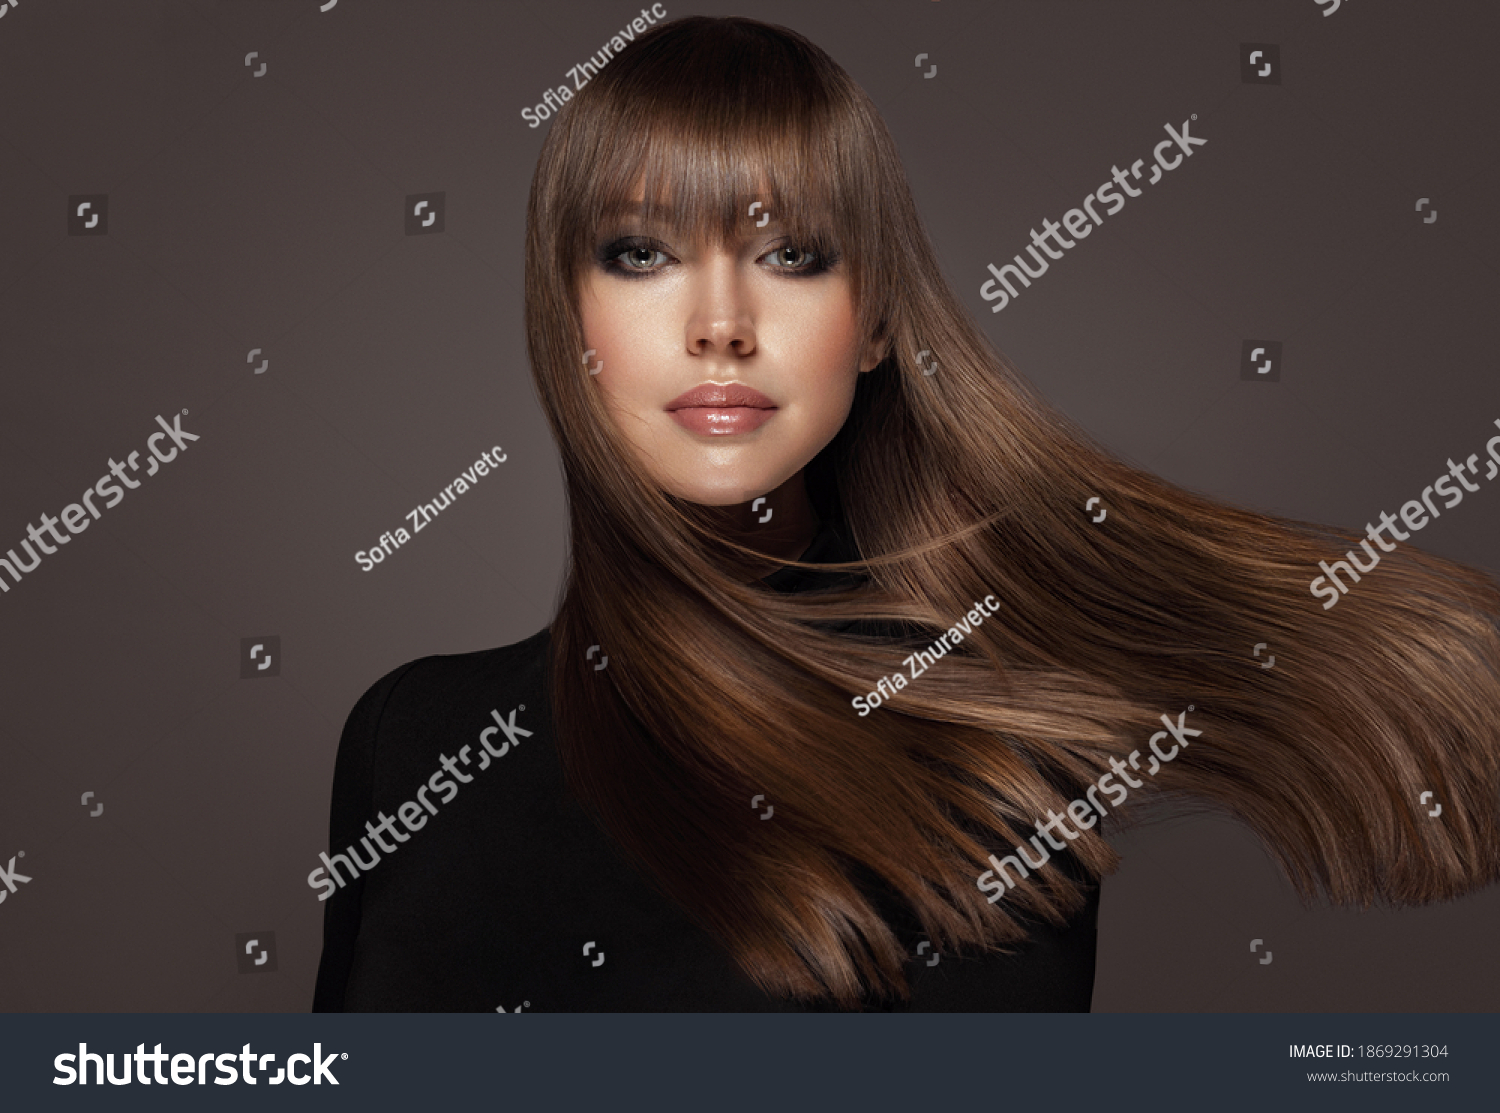 Beautiful model woman with shiny and straight long hair. Keratin straightening. Treatment, care and spa procedures. Beauty girl smooth hairstyle #1869291304